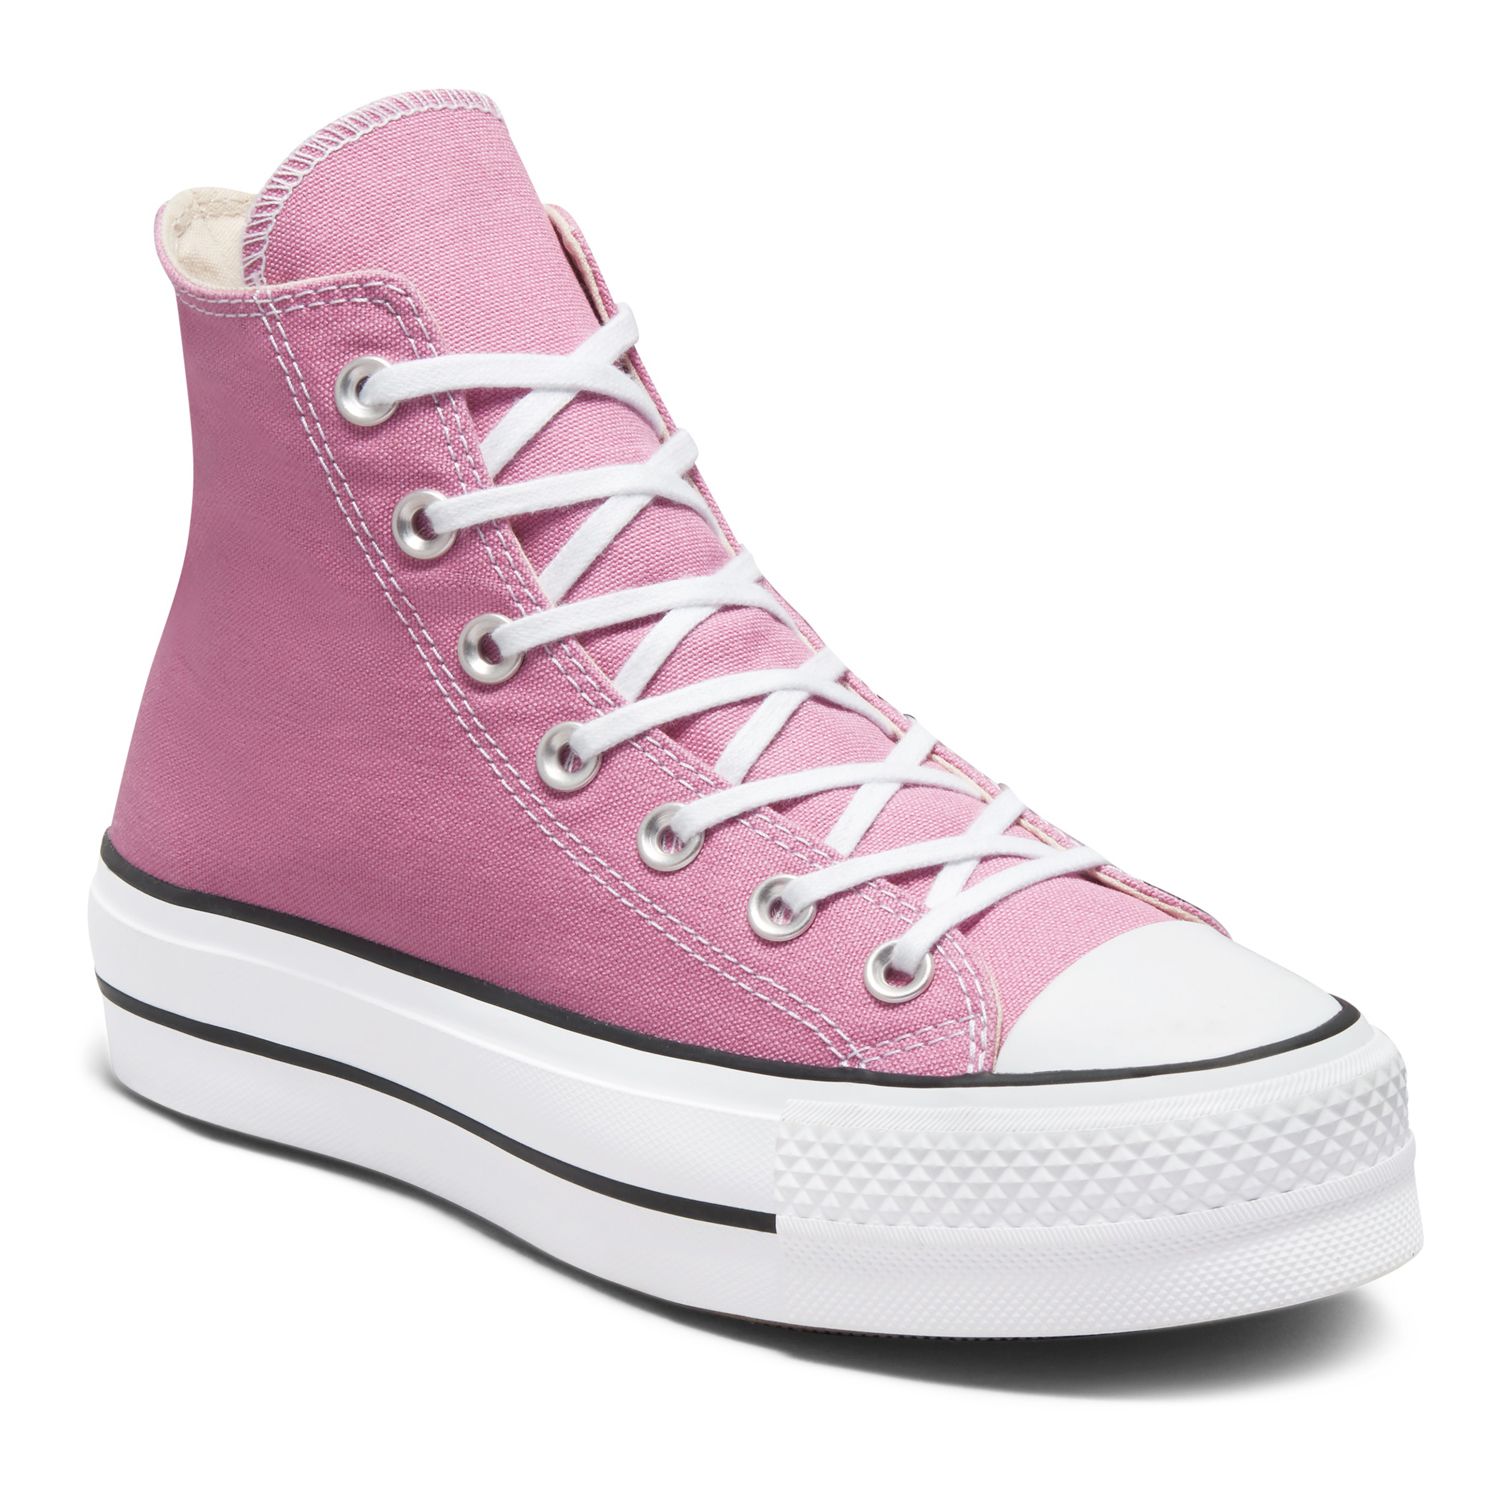 pale pink converse high tops,Save up to 16%,www.ilcascinone.com